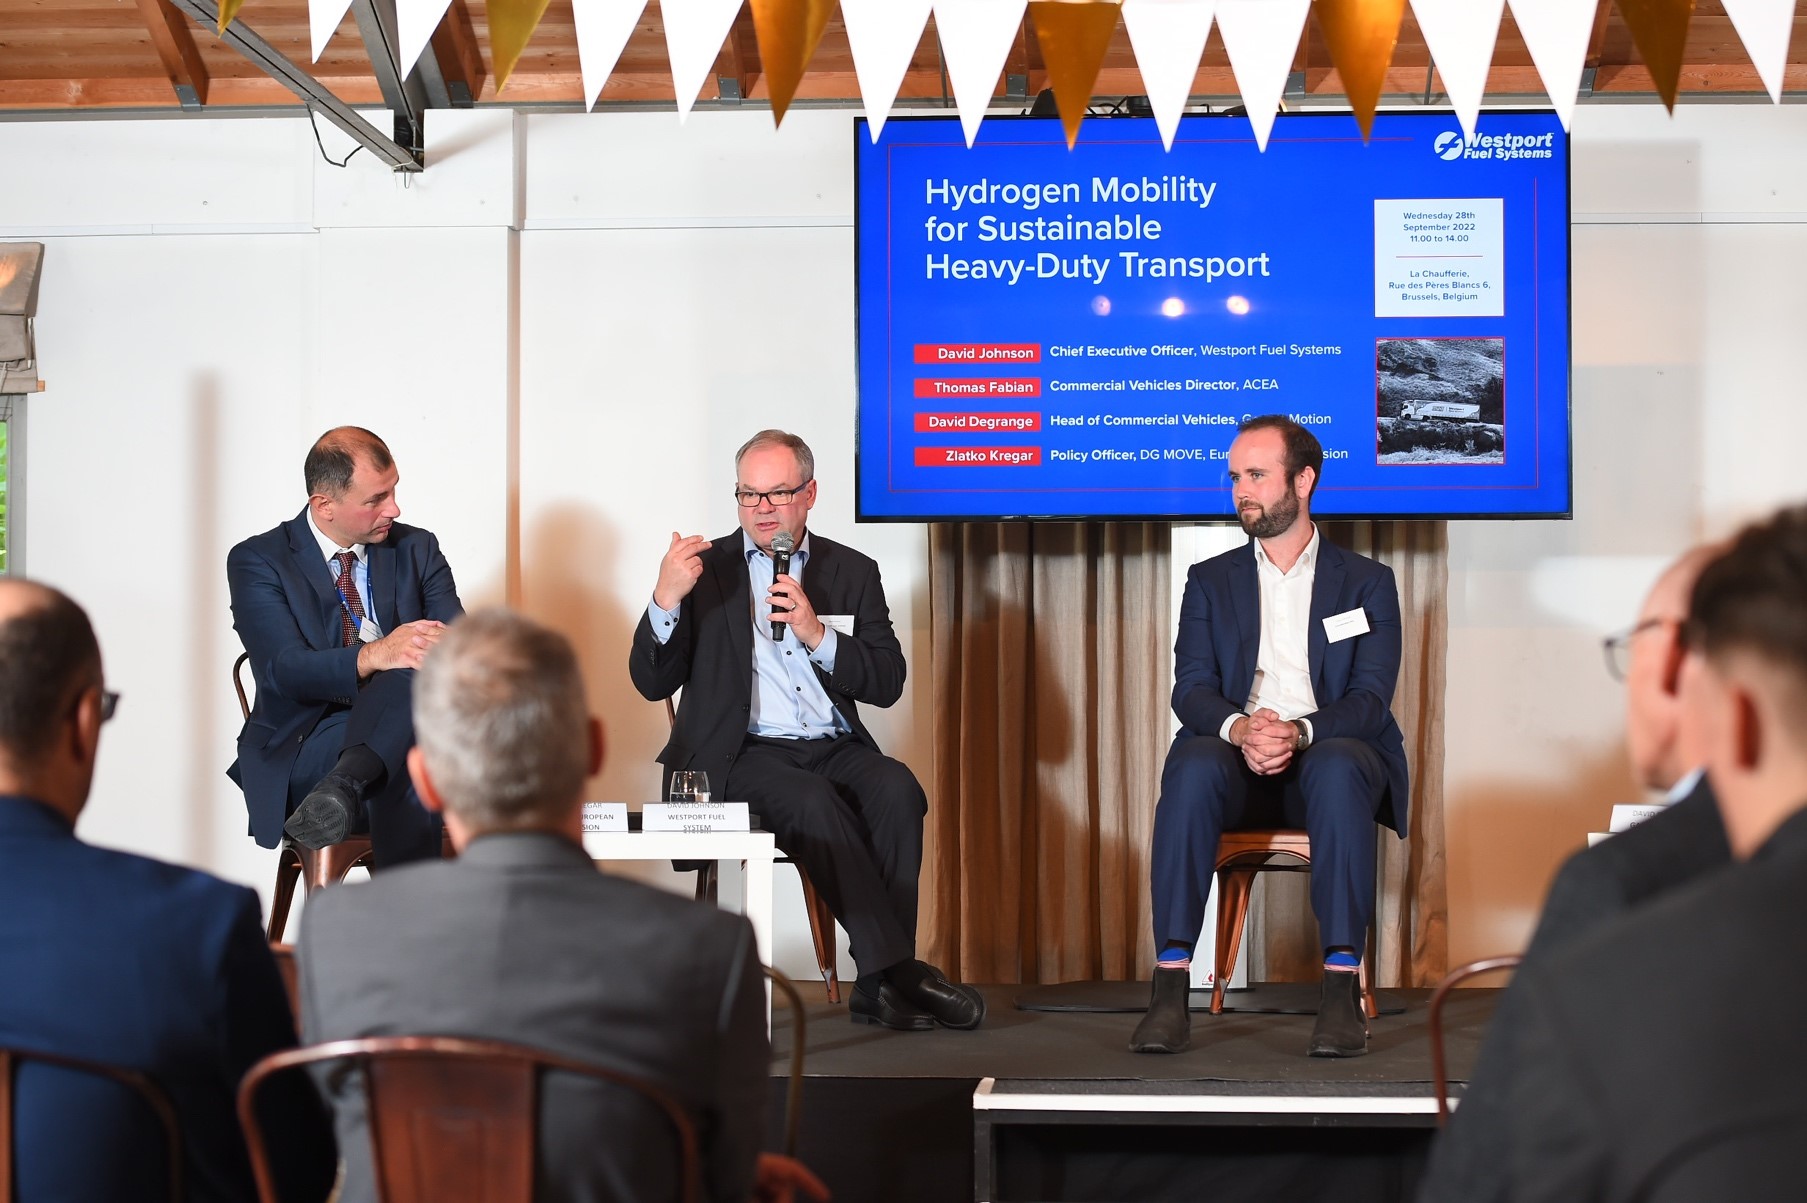 Hydrogen Mobility for Sustainable Heavy-Duty Transport, Westport Unveils Game-Changing Technology in Brussels